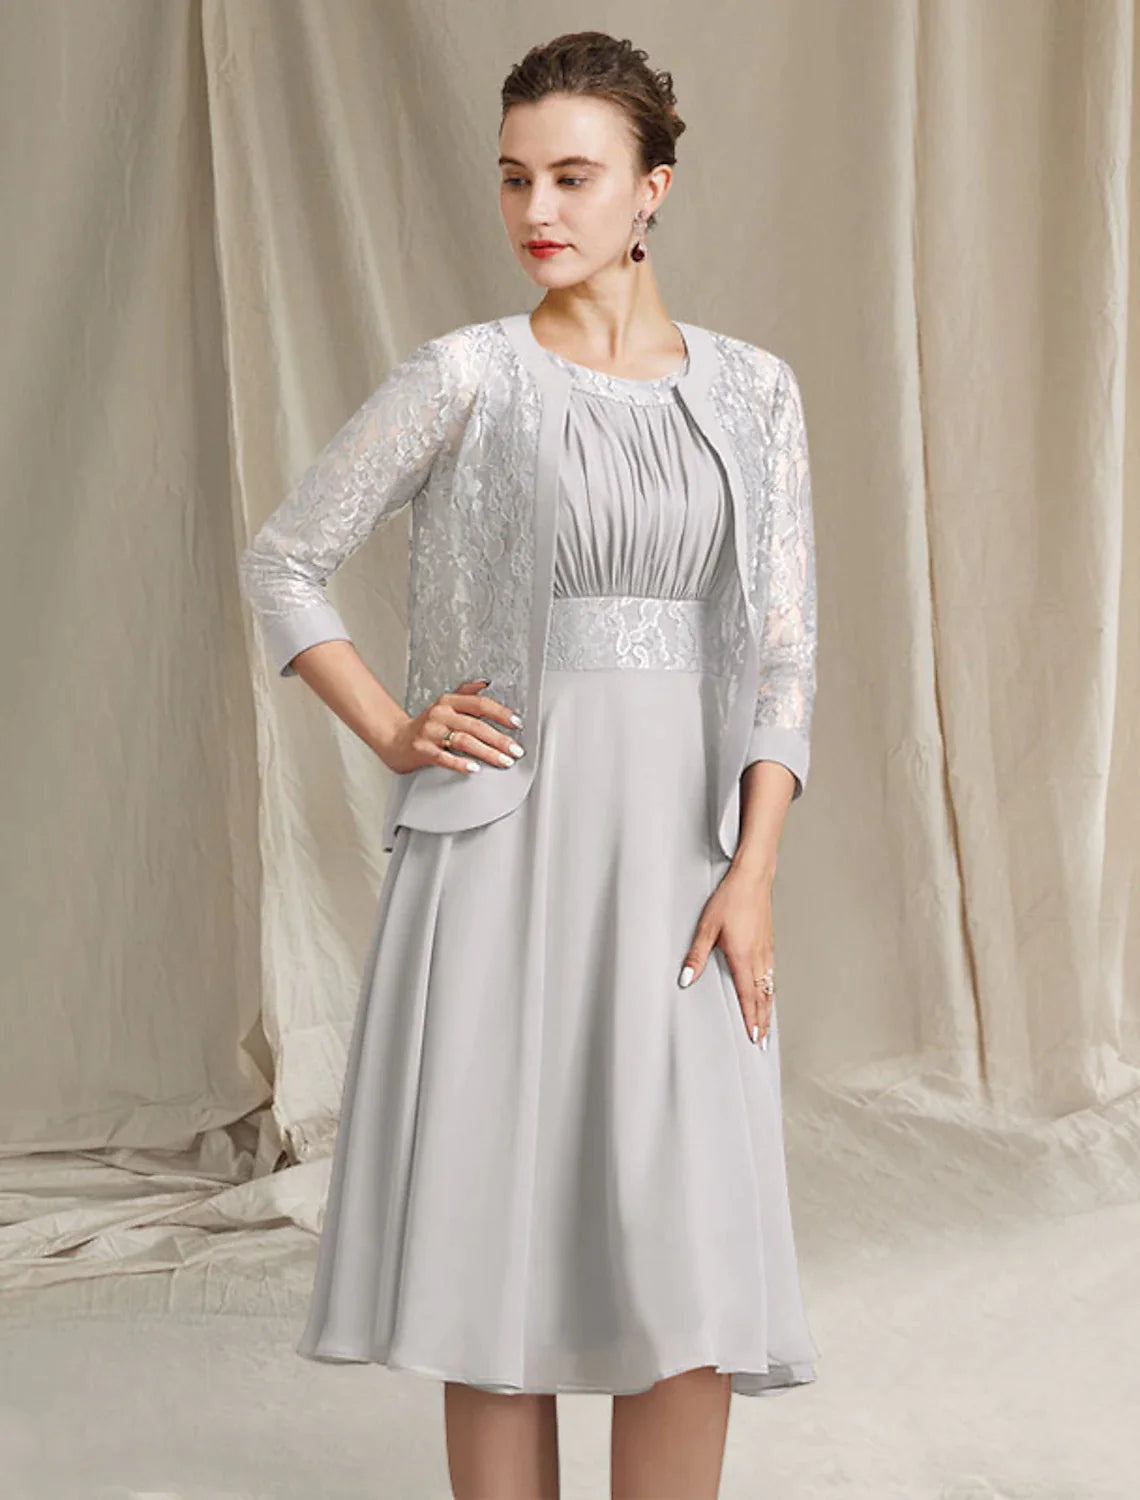 Two Piece A-Line Mother of the Bride Dress Church Elegant Jewel Neck Knee Length Chiffon Lace Sleeveless Wrap Included with Pleats Appliques